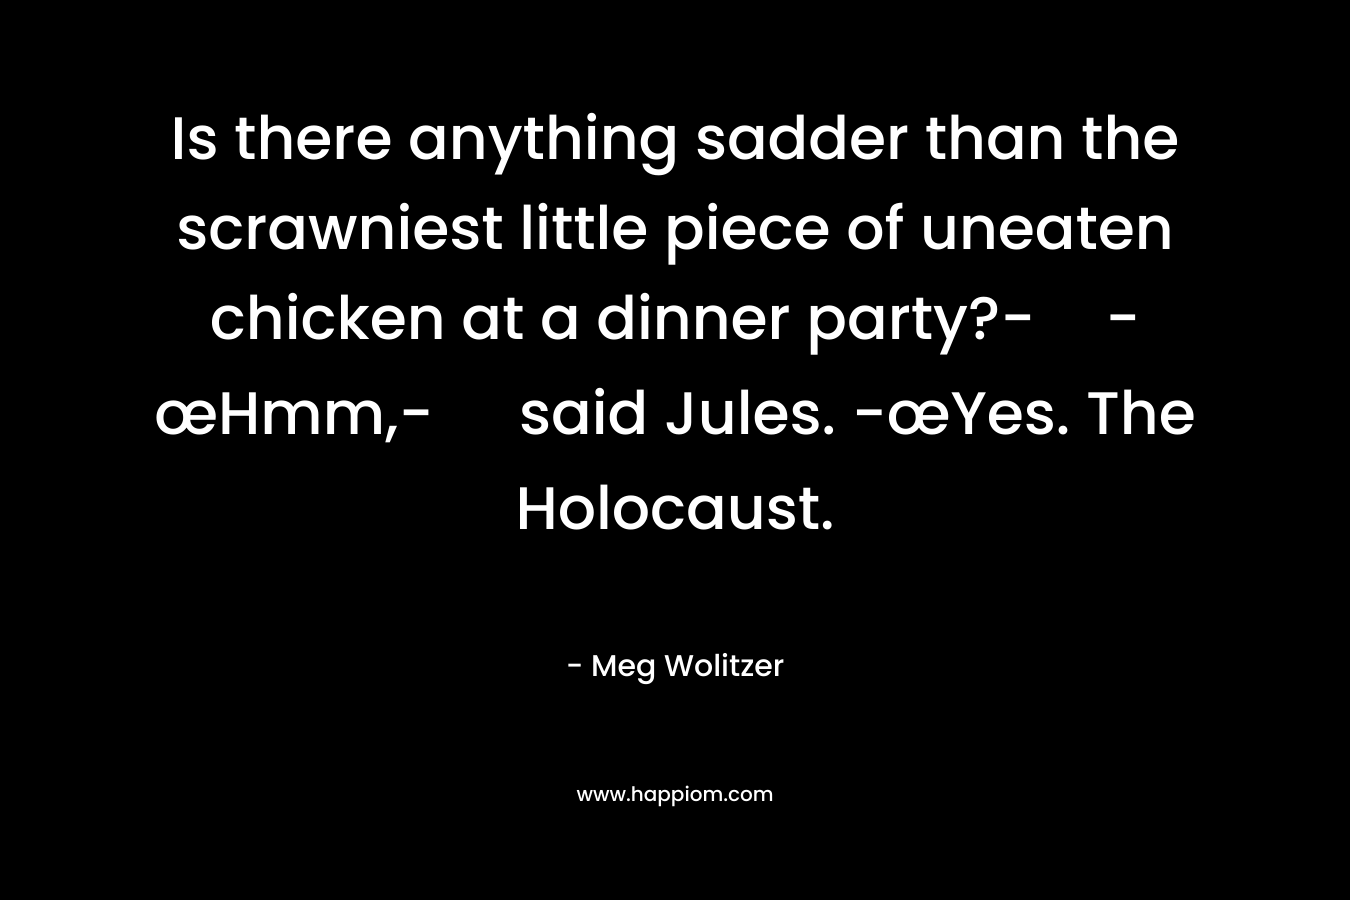 Is there anything sadder than the scrawniest little piece of uneaten chicken at a dinner party?--œHmm,- said Jules. -œYes. The Holocaust.